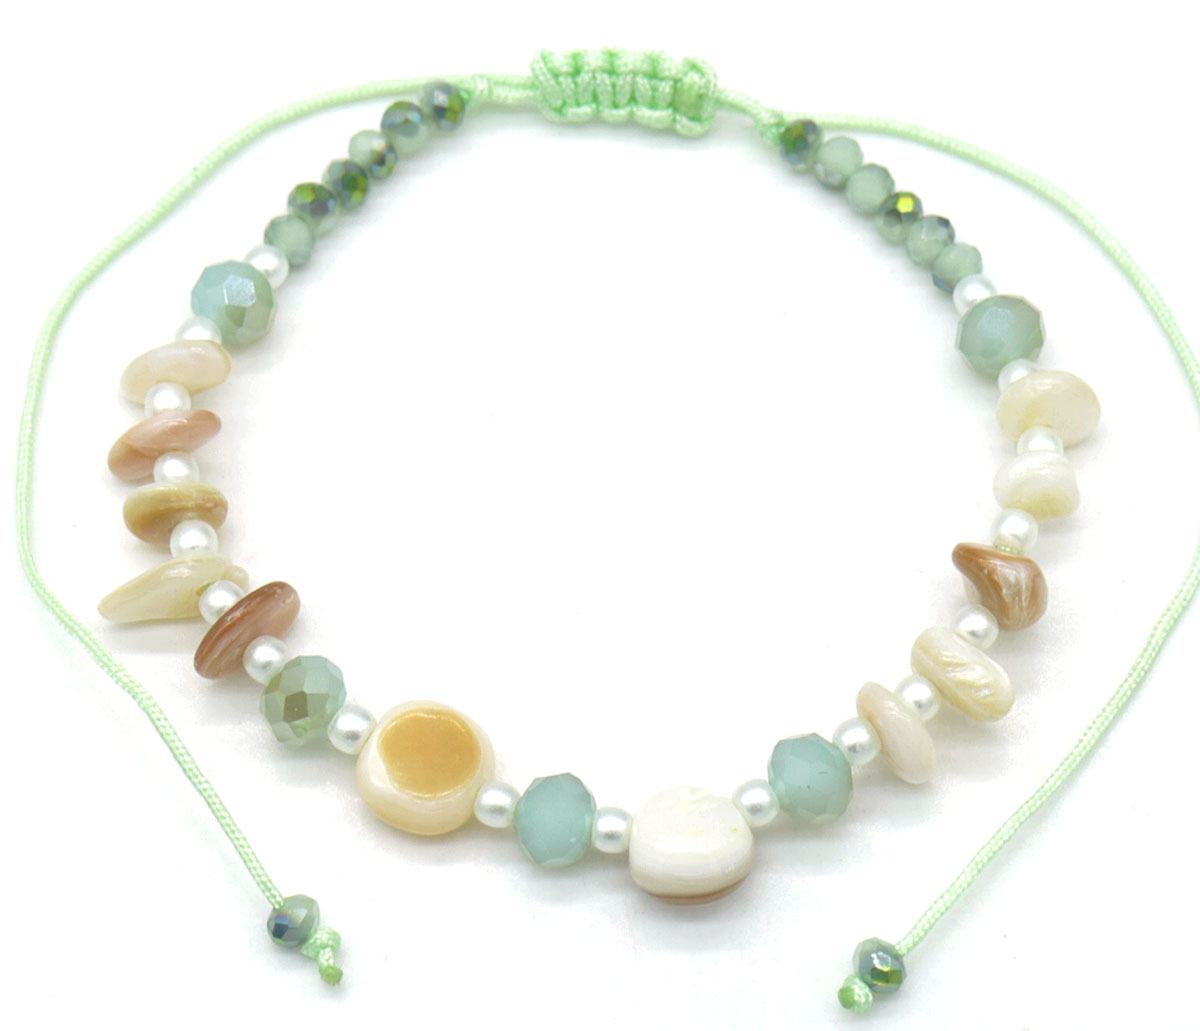 A-D11.1 ANK830-003-02 Anklet beads Green